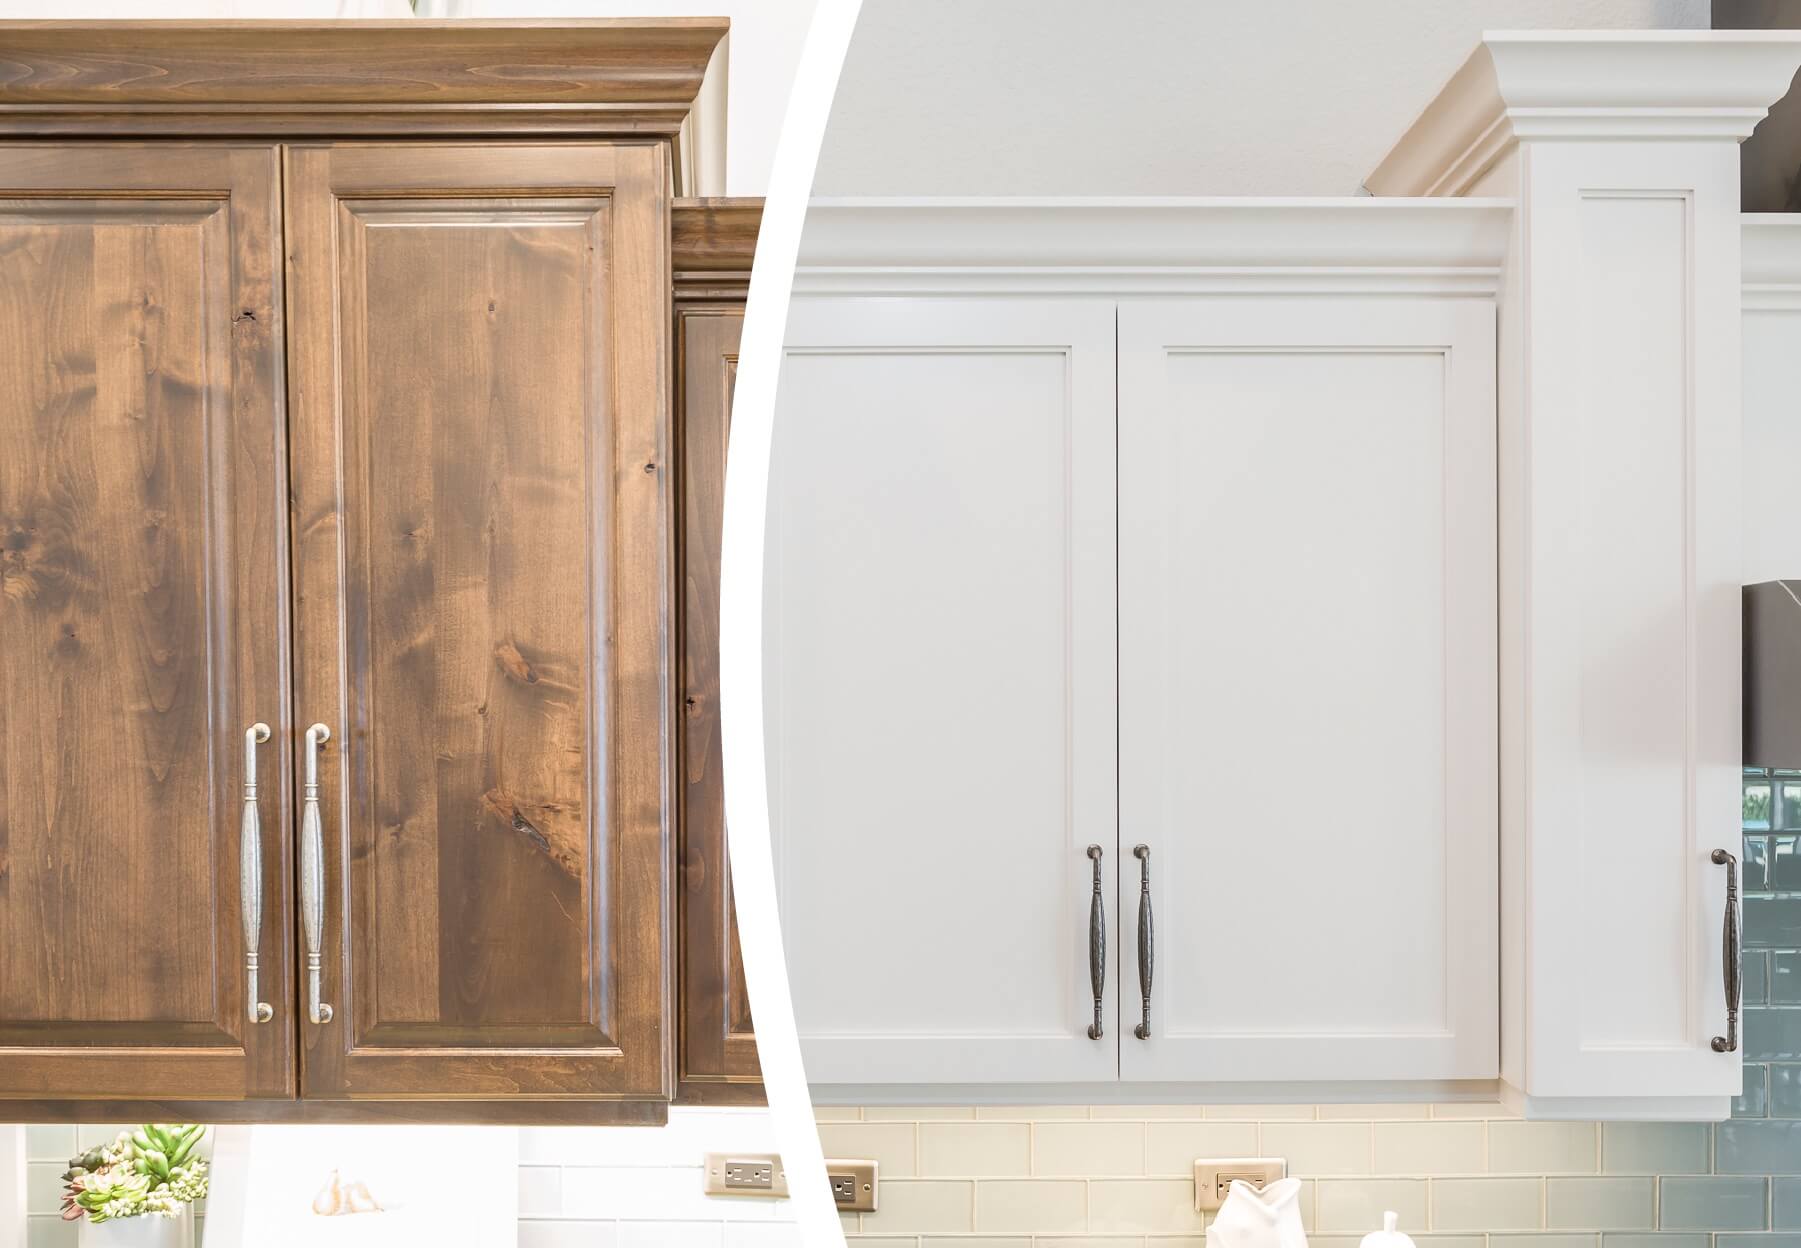 Replacement Doors And Drawer Fronts For Kitchen Cabinets